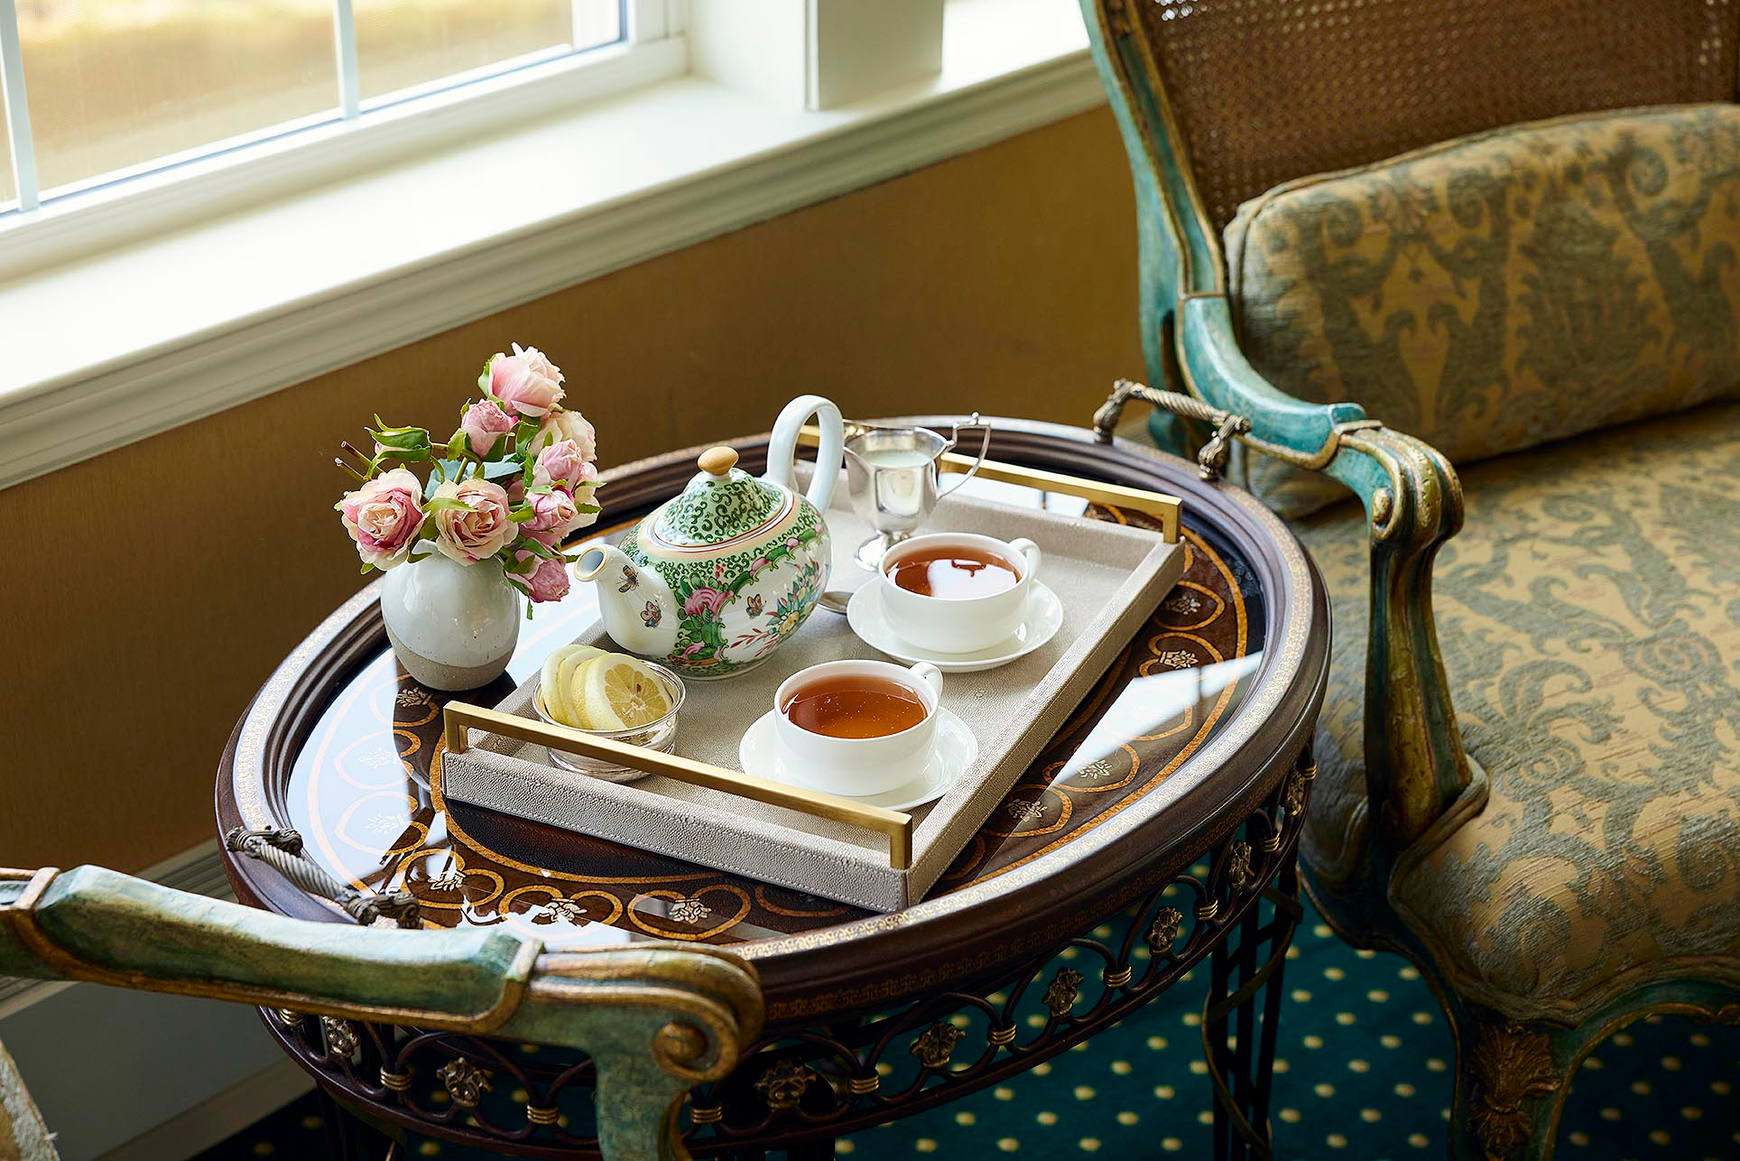 Afternoon tea with beautiful china and fresh flowers